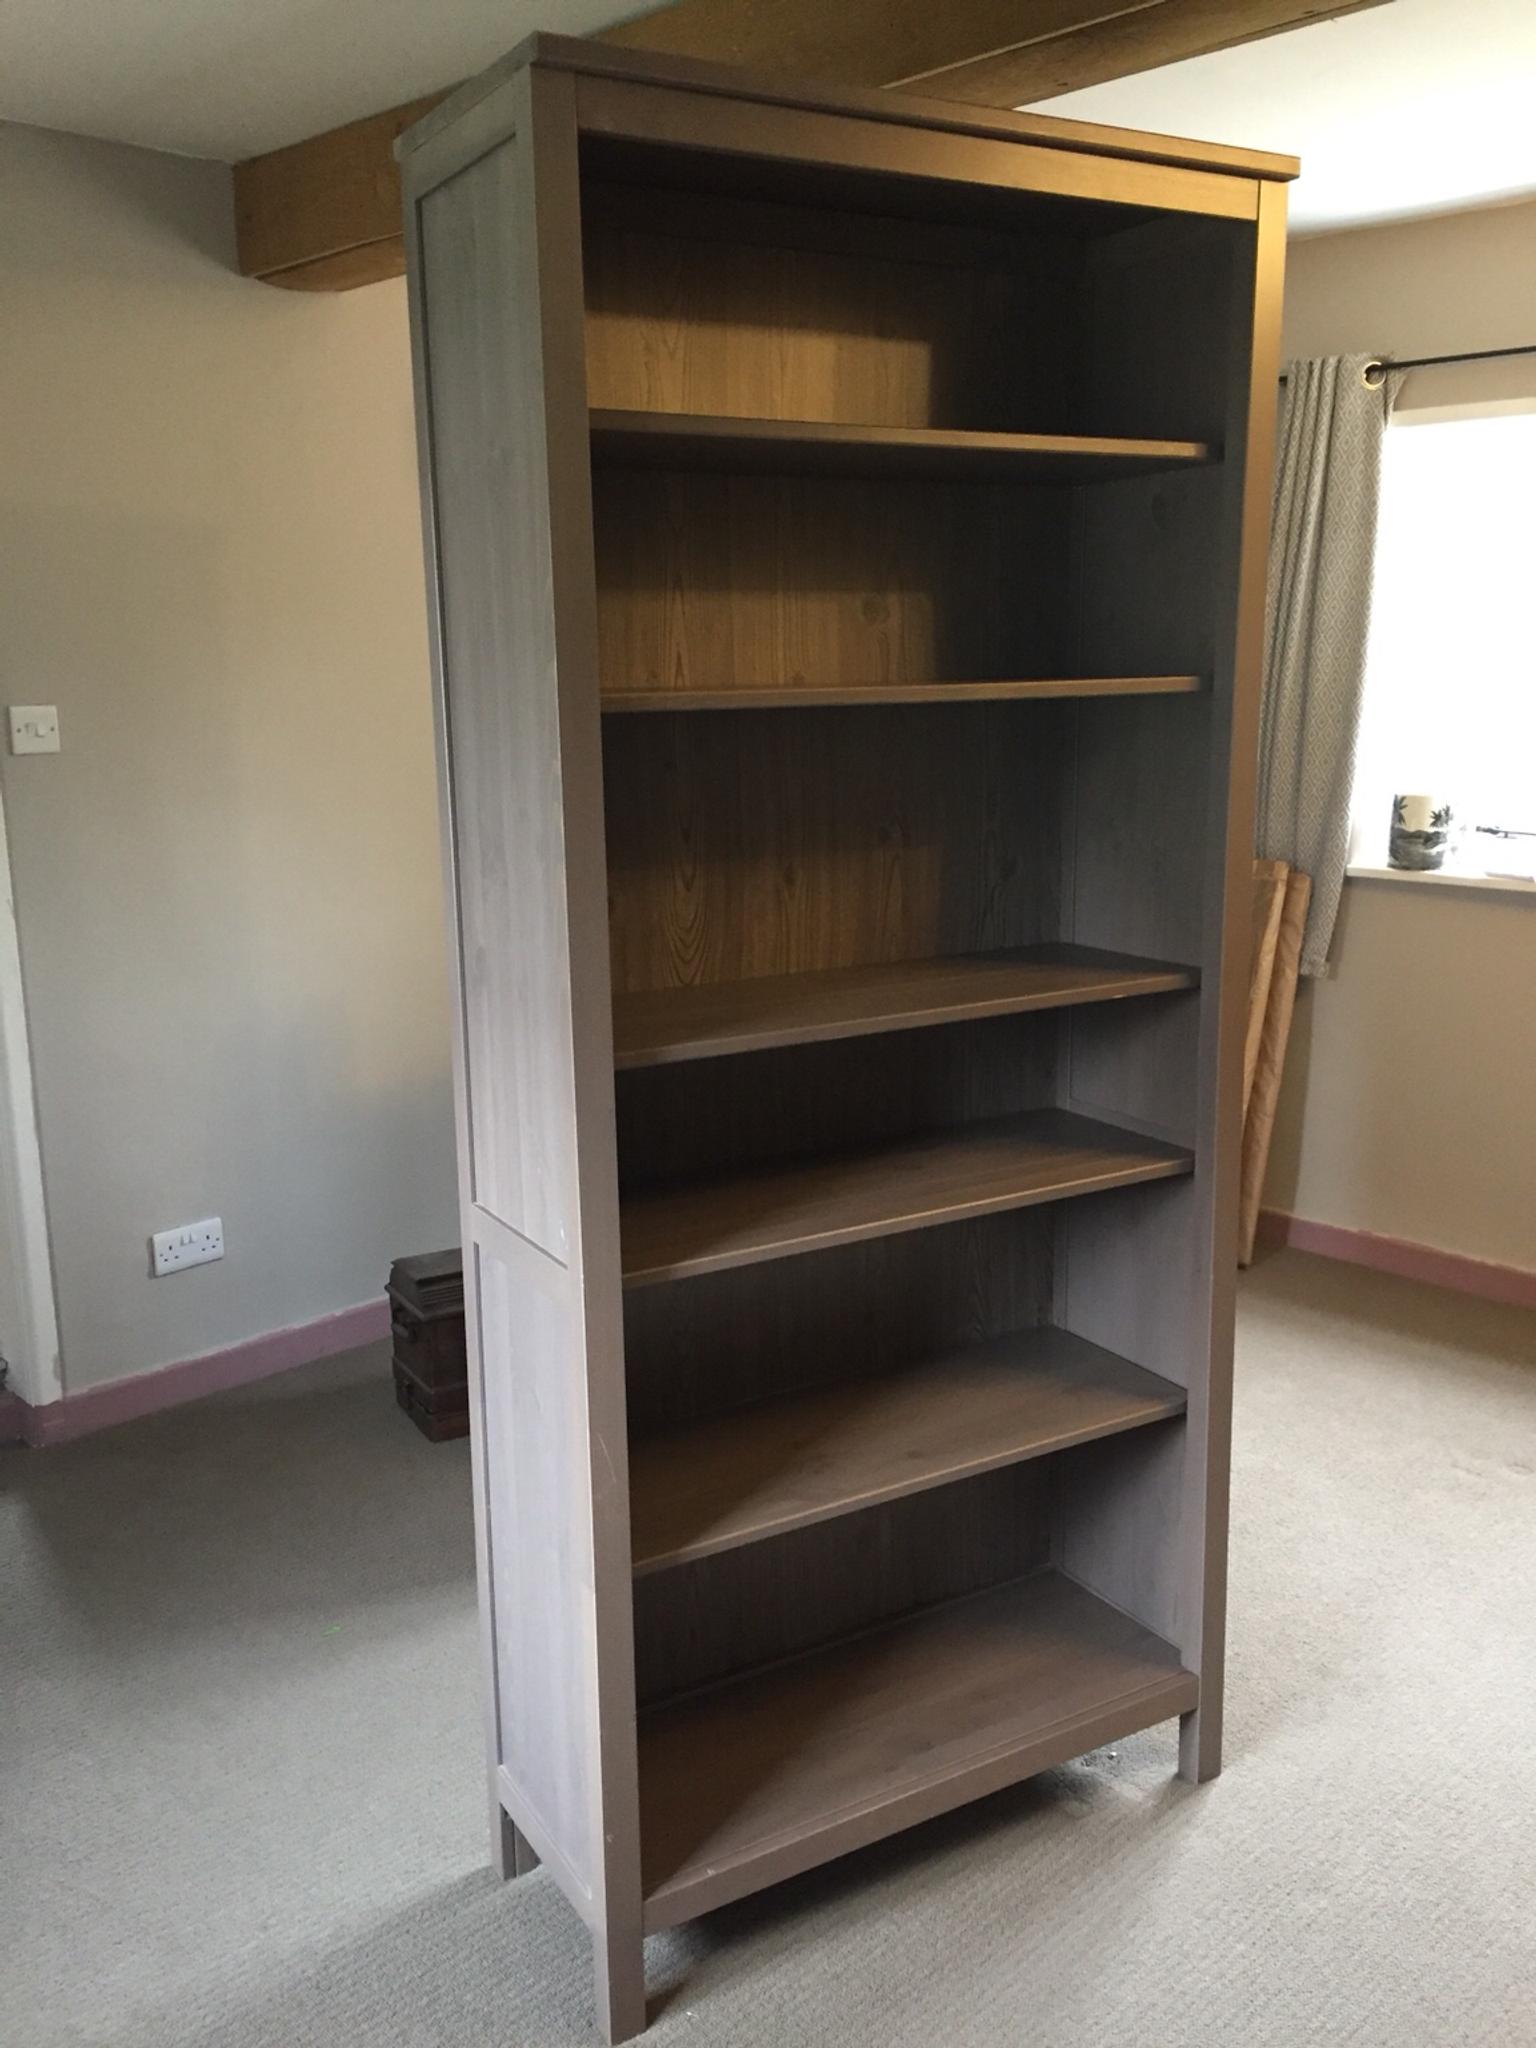 Ikea Hemnes Bookcase In Ox14 Oxfordshire For 30 00 For Sale Shpock